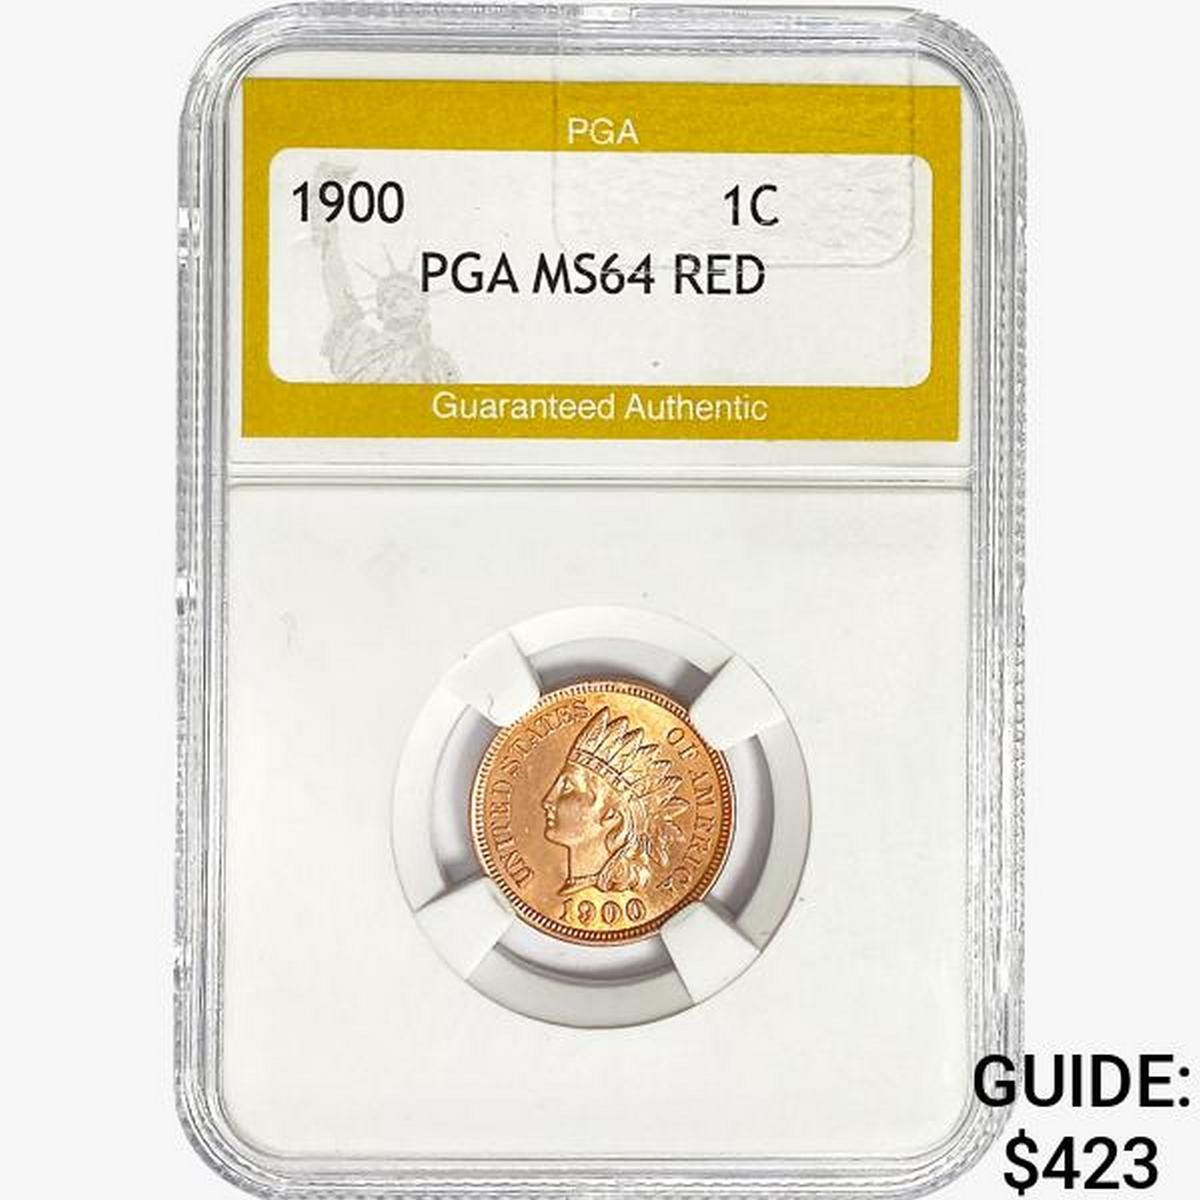 1900 Indian Head Cent PGA MS64 RED